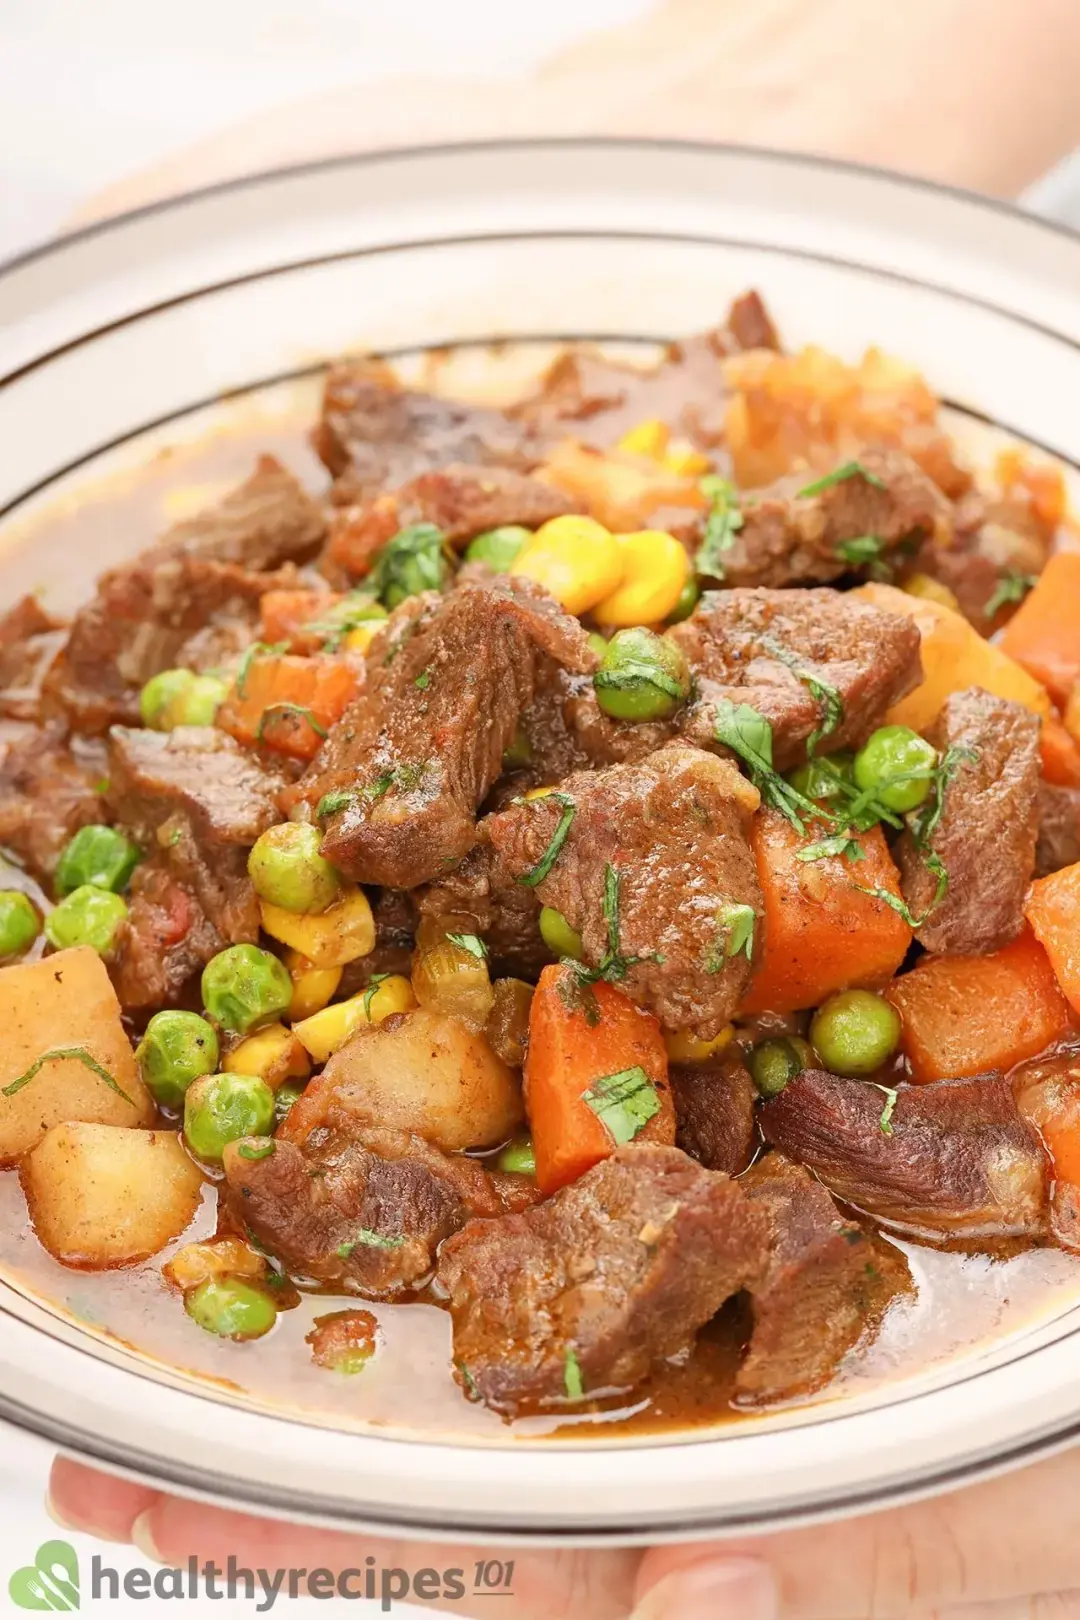 How to Store and Reheat Vegetable Beef Soup